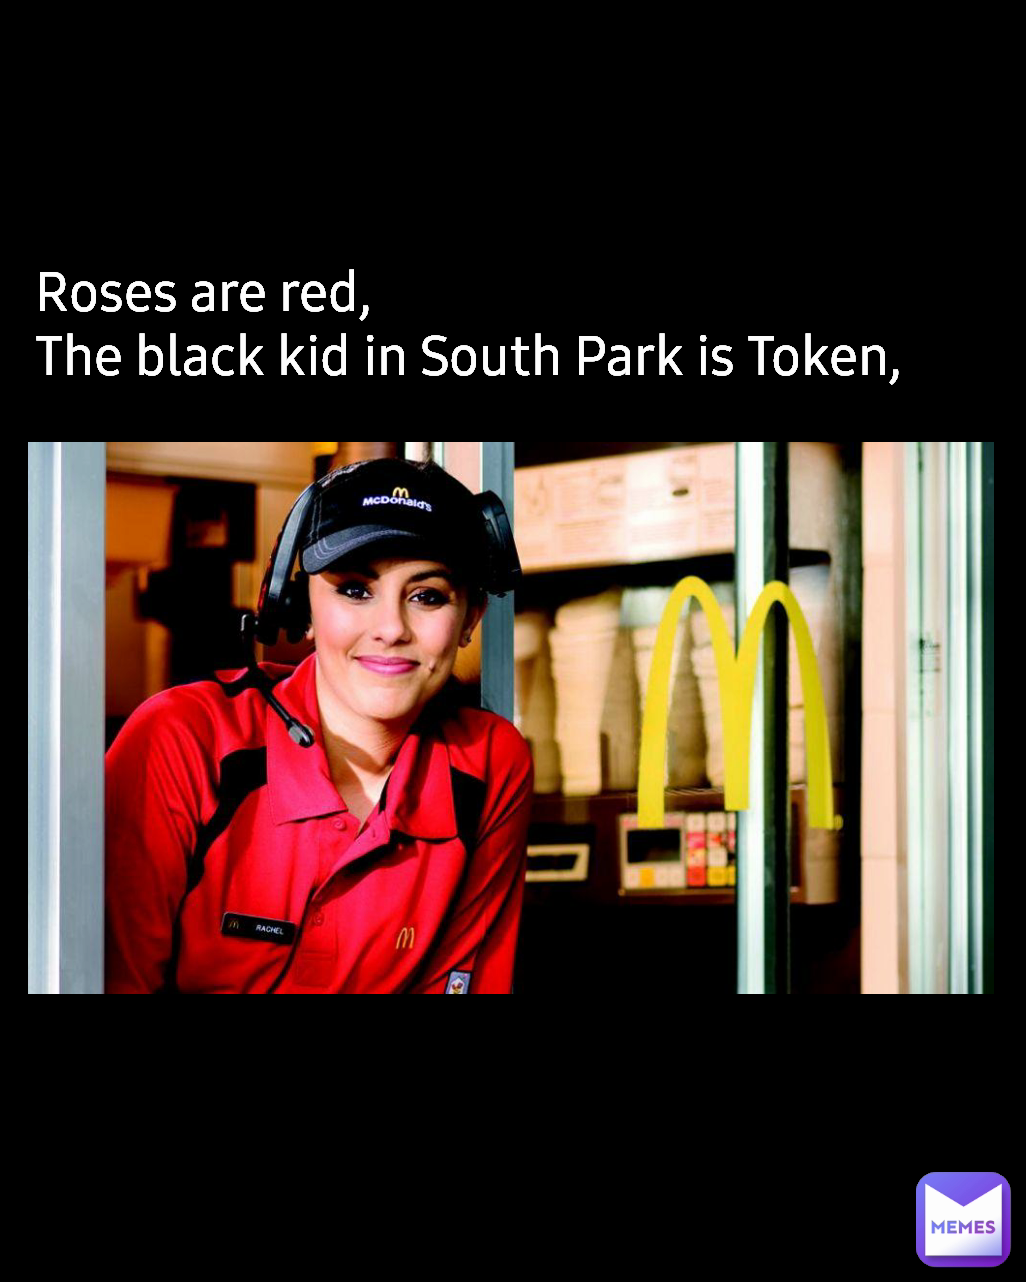 Roses are red,
The black kid in South Park is Token, 
